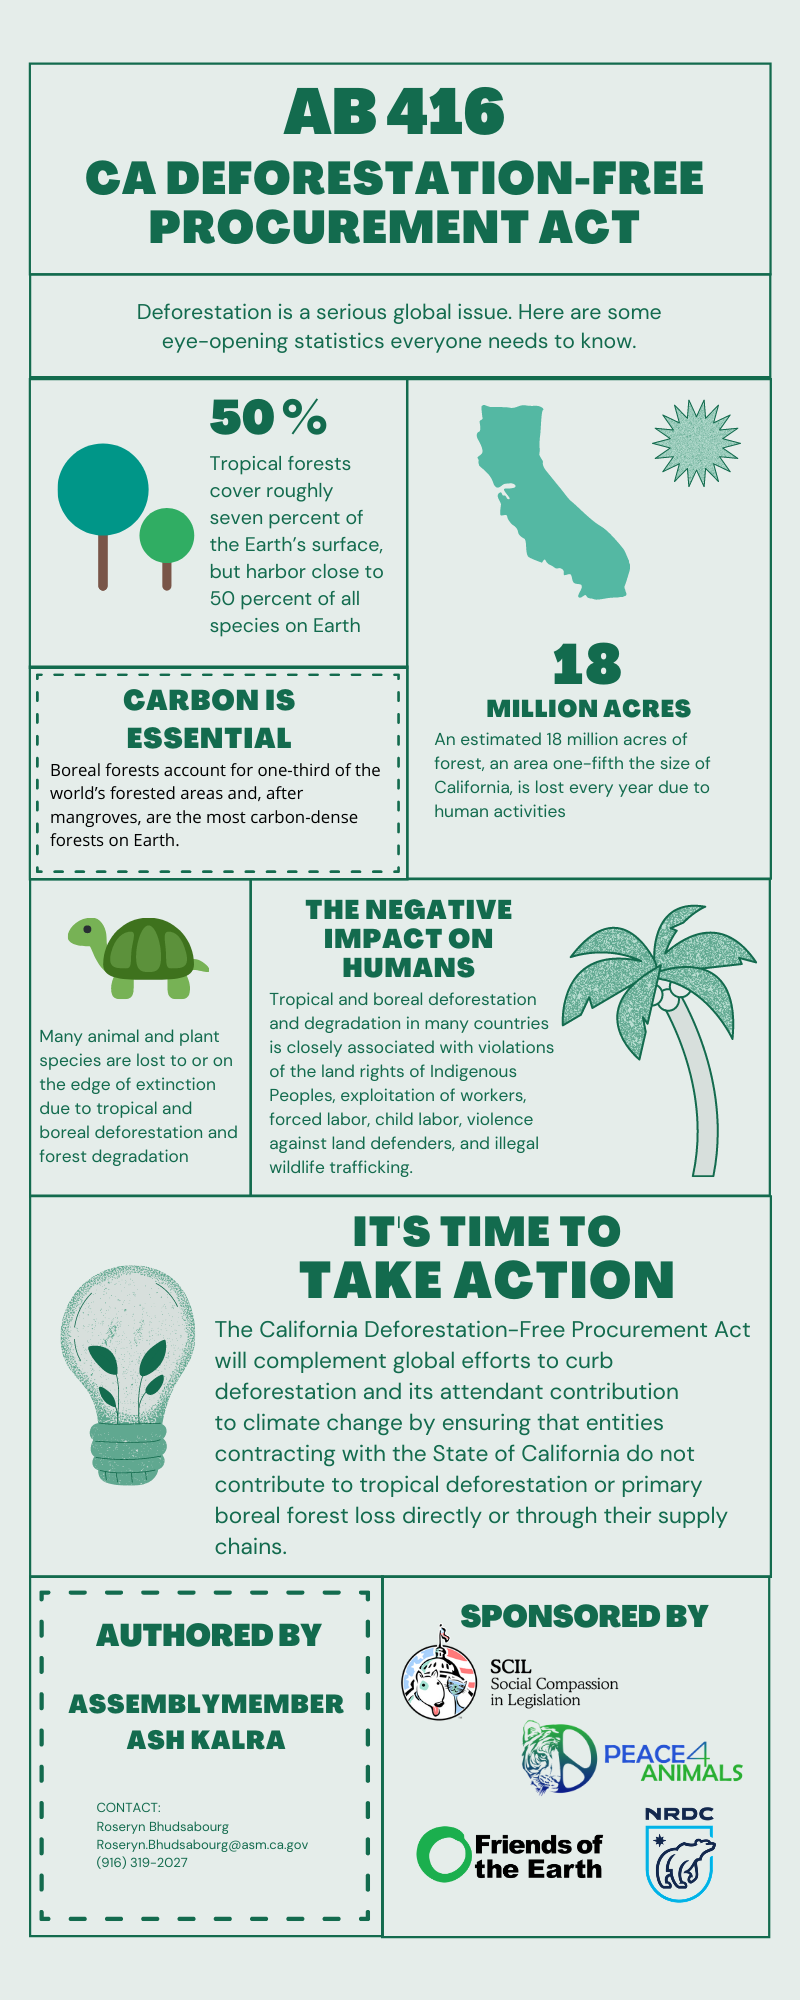 AB 416, CA DEFORESTATION-FREE PROCUREMENT ACT  Deforestation is a serious global issue.  Here are some eye-opening statistics everyone needs to know. ●	50%: Tropical forests cover roughly seven percent of the Earth’s surface, but harbor close to 50 percent of all species on Earth. ●	Carbon is essential: Boreal forests account for one-third of the world’s forested areas and, after mangroves, are the most carbon-dense forests on Earth. ●	18 million acres: An estimated 18 million acres of forest, an area one-